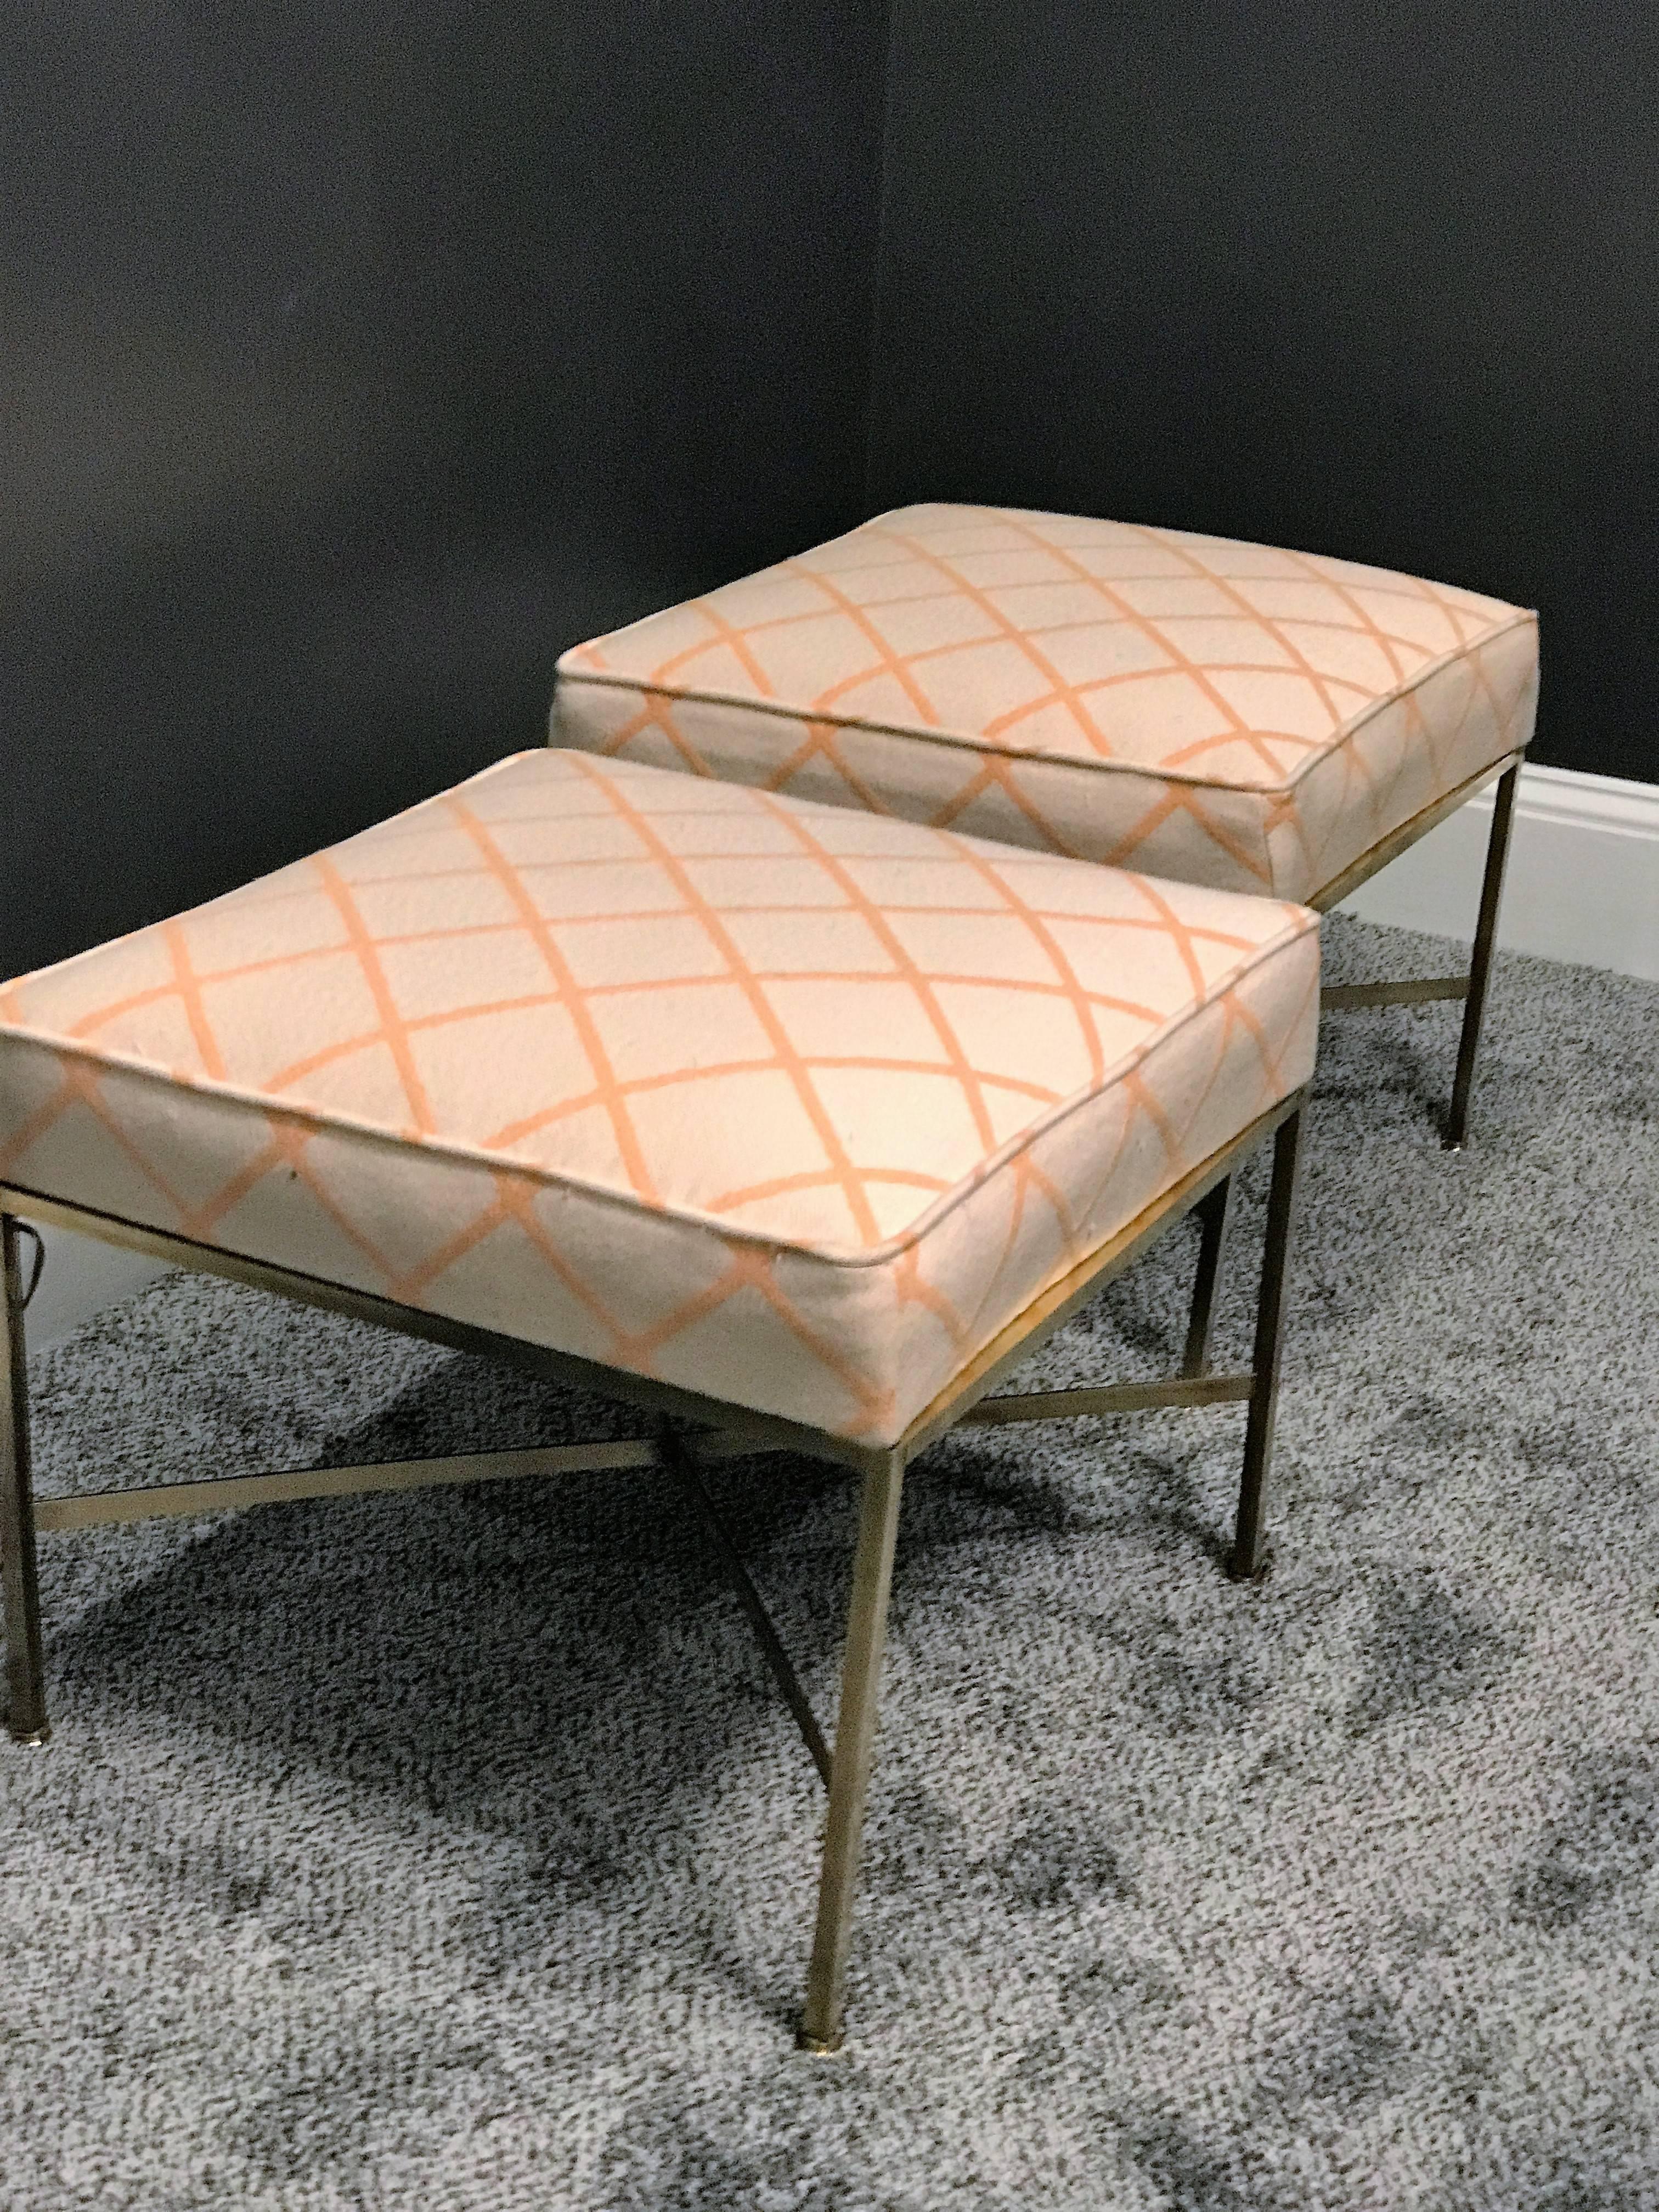 Polished brass tubular stools with the original Mid-Century fabric designed by Paul McCobb. Solid brass feet complete these versatile stools that could compliment many interiors.